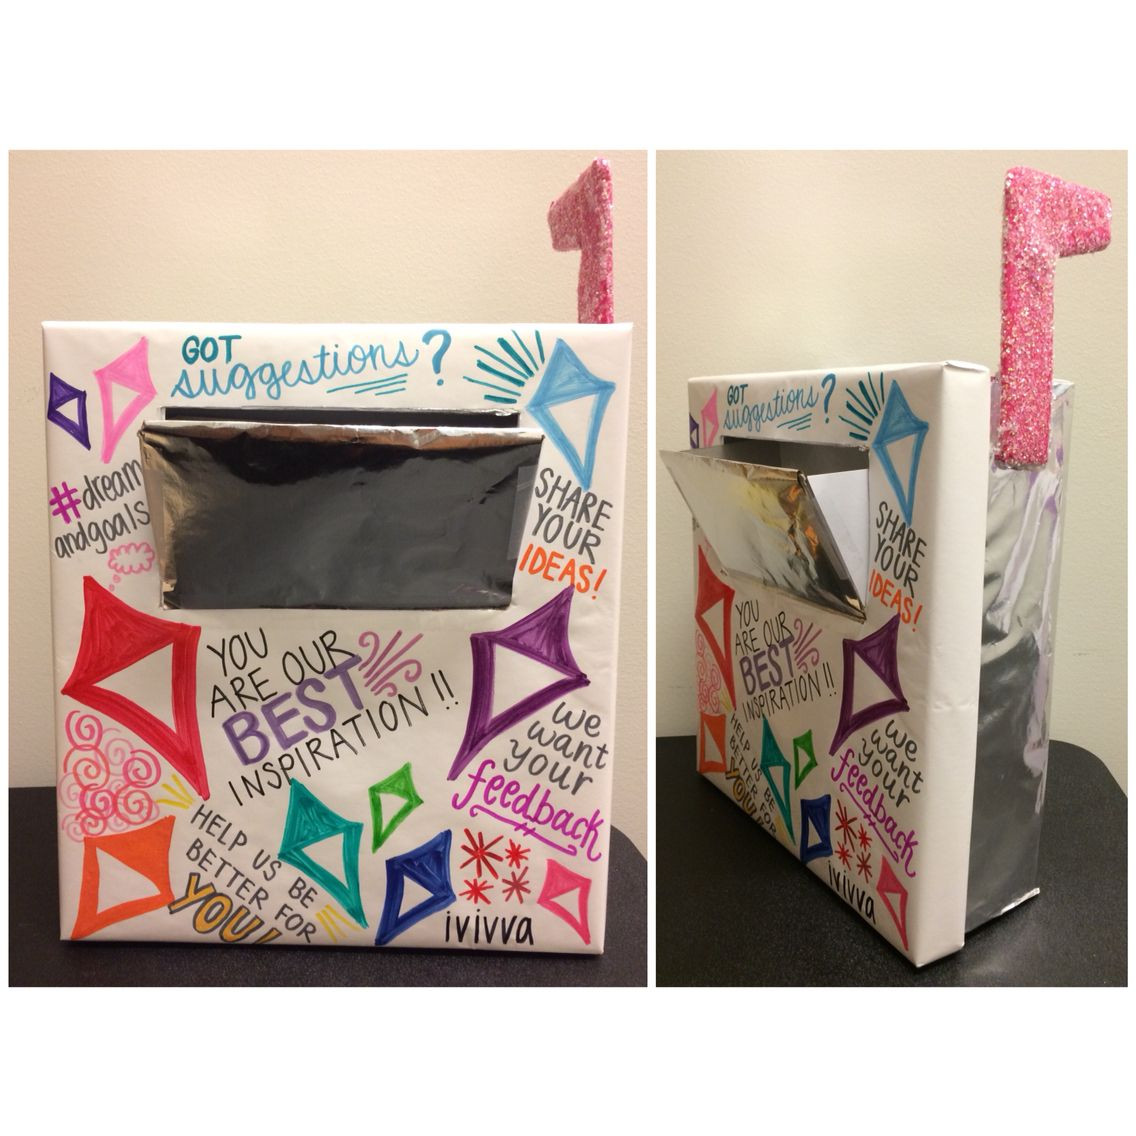 DIY Suggestion Box
 DIY suggestion mail box for ivivva 2015